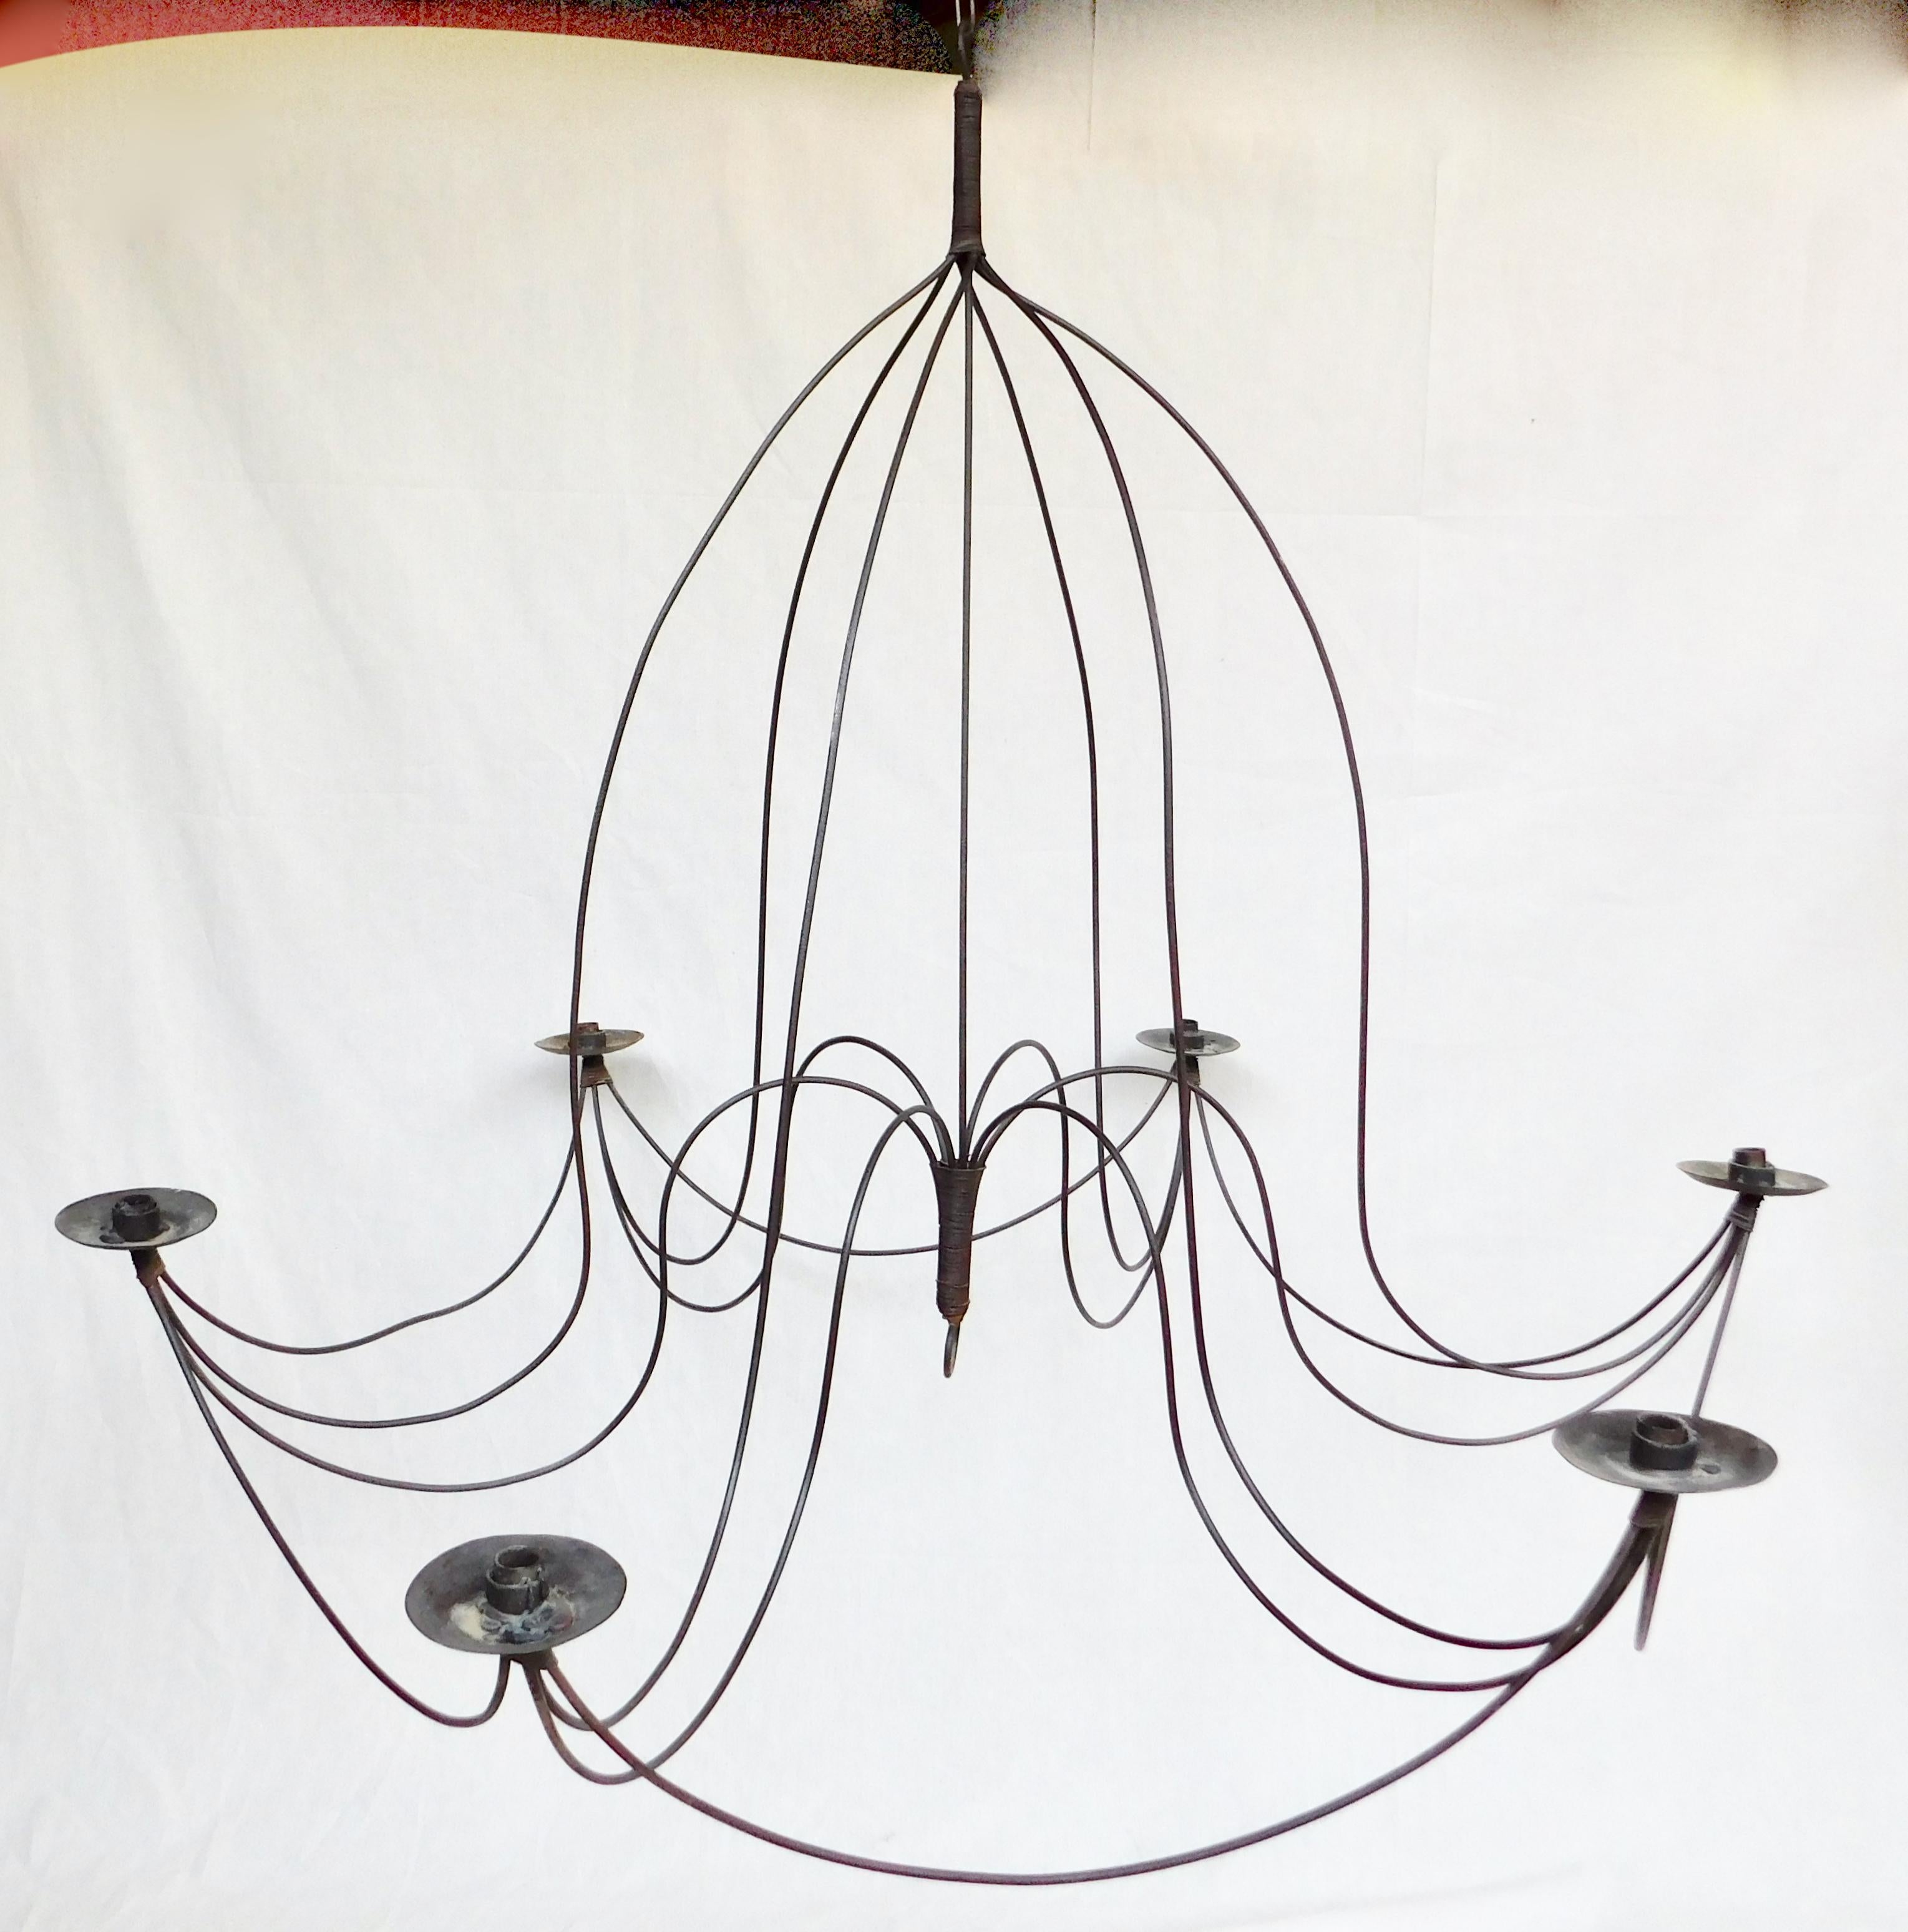 A large handmade vintage Italian metal swag chandelier.
Found in the Italian countryside, this candle chandelier is a large size but light and airy design giving an elegant and delicate feeling not normally associated with metal chandeliers.